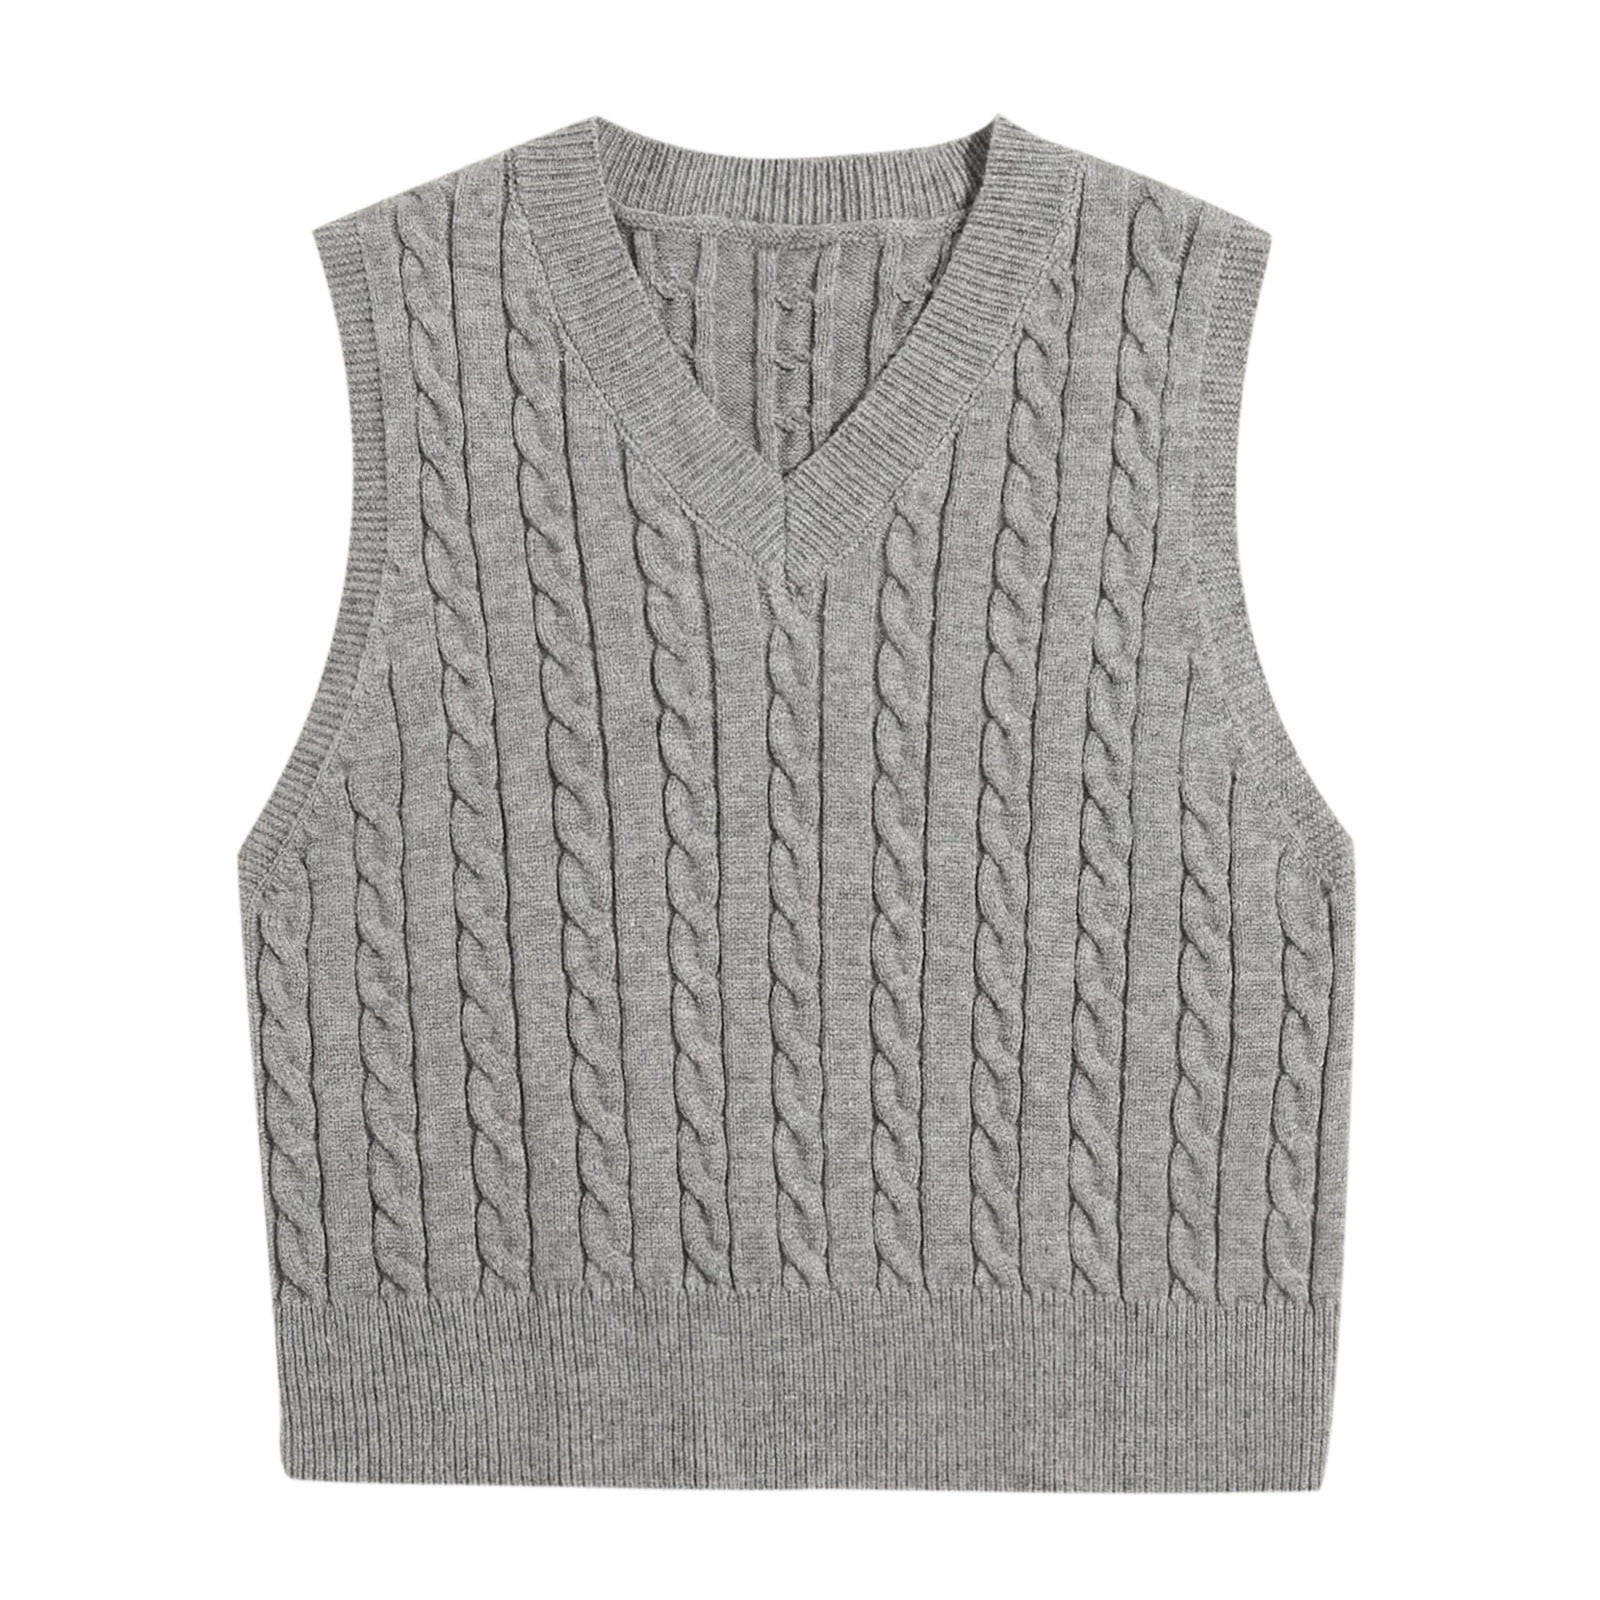 ZQGJB Women's V-Neck Knit Sweater Vest Solid Color Sleeveless Crop Knitwear  Trendy Lightweight Cropped Pullover Vest Sweaters Tops Gray XL